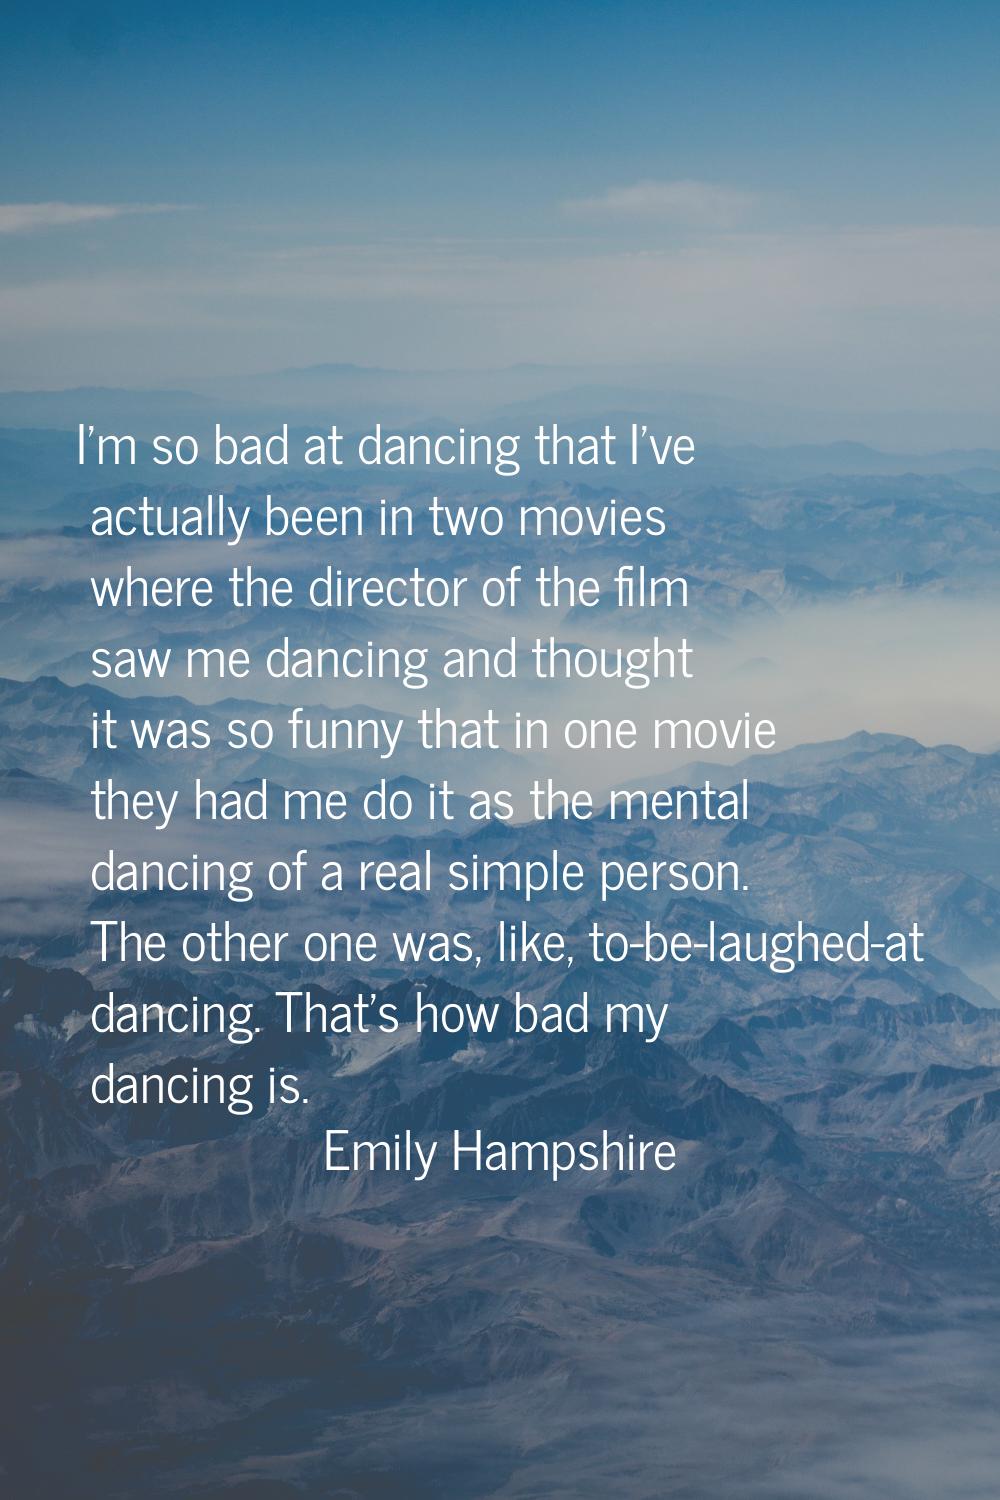 I'm so bad at dancing that I've actually been in two movies where the director of the film saw me d